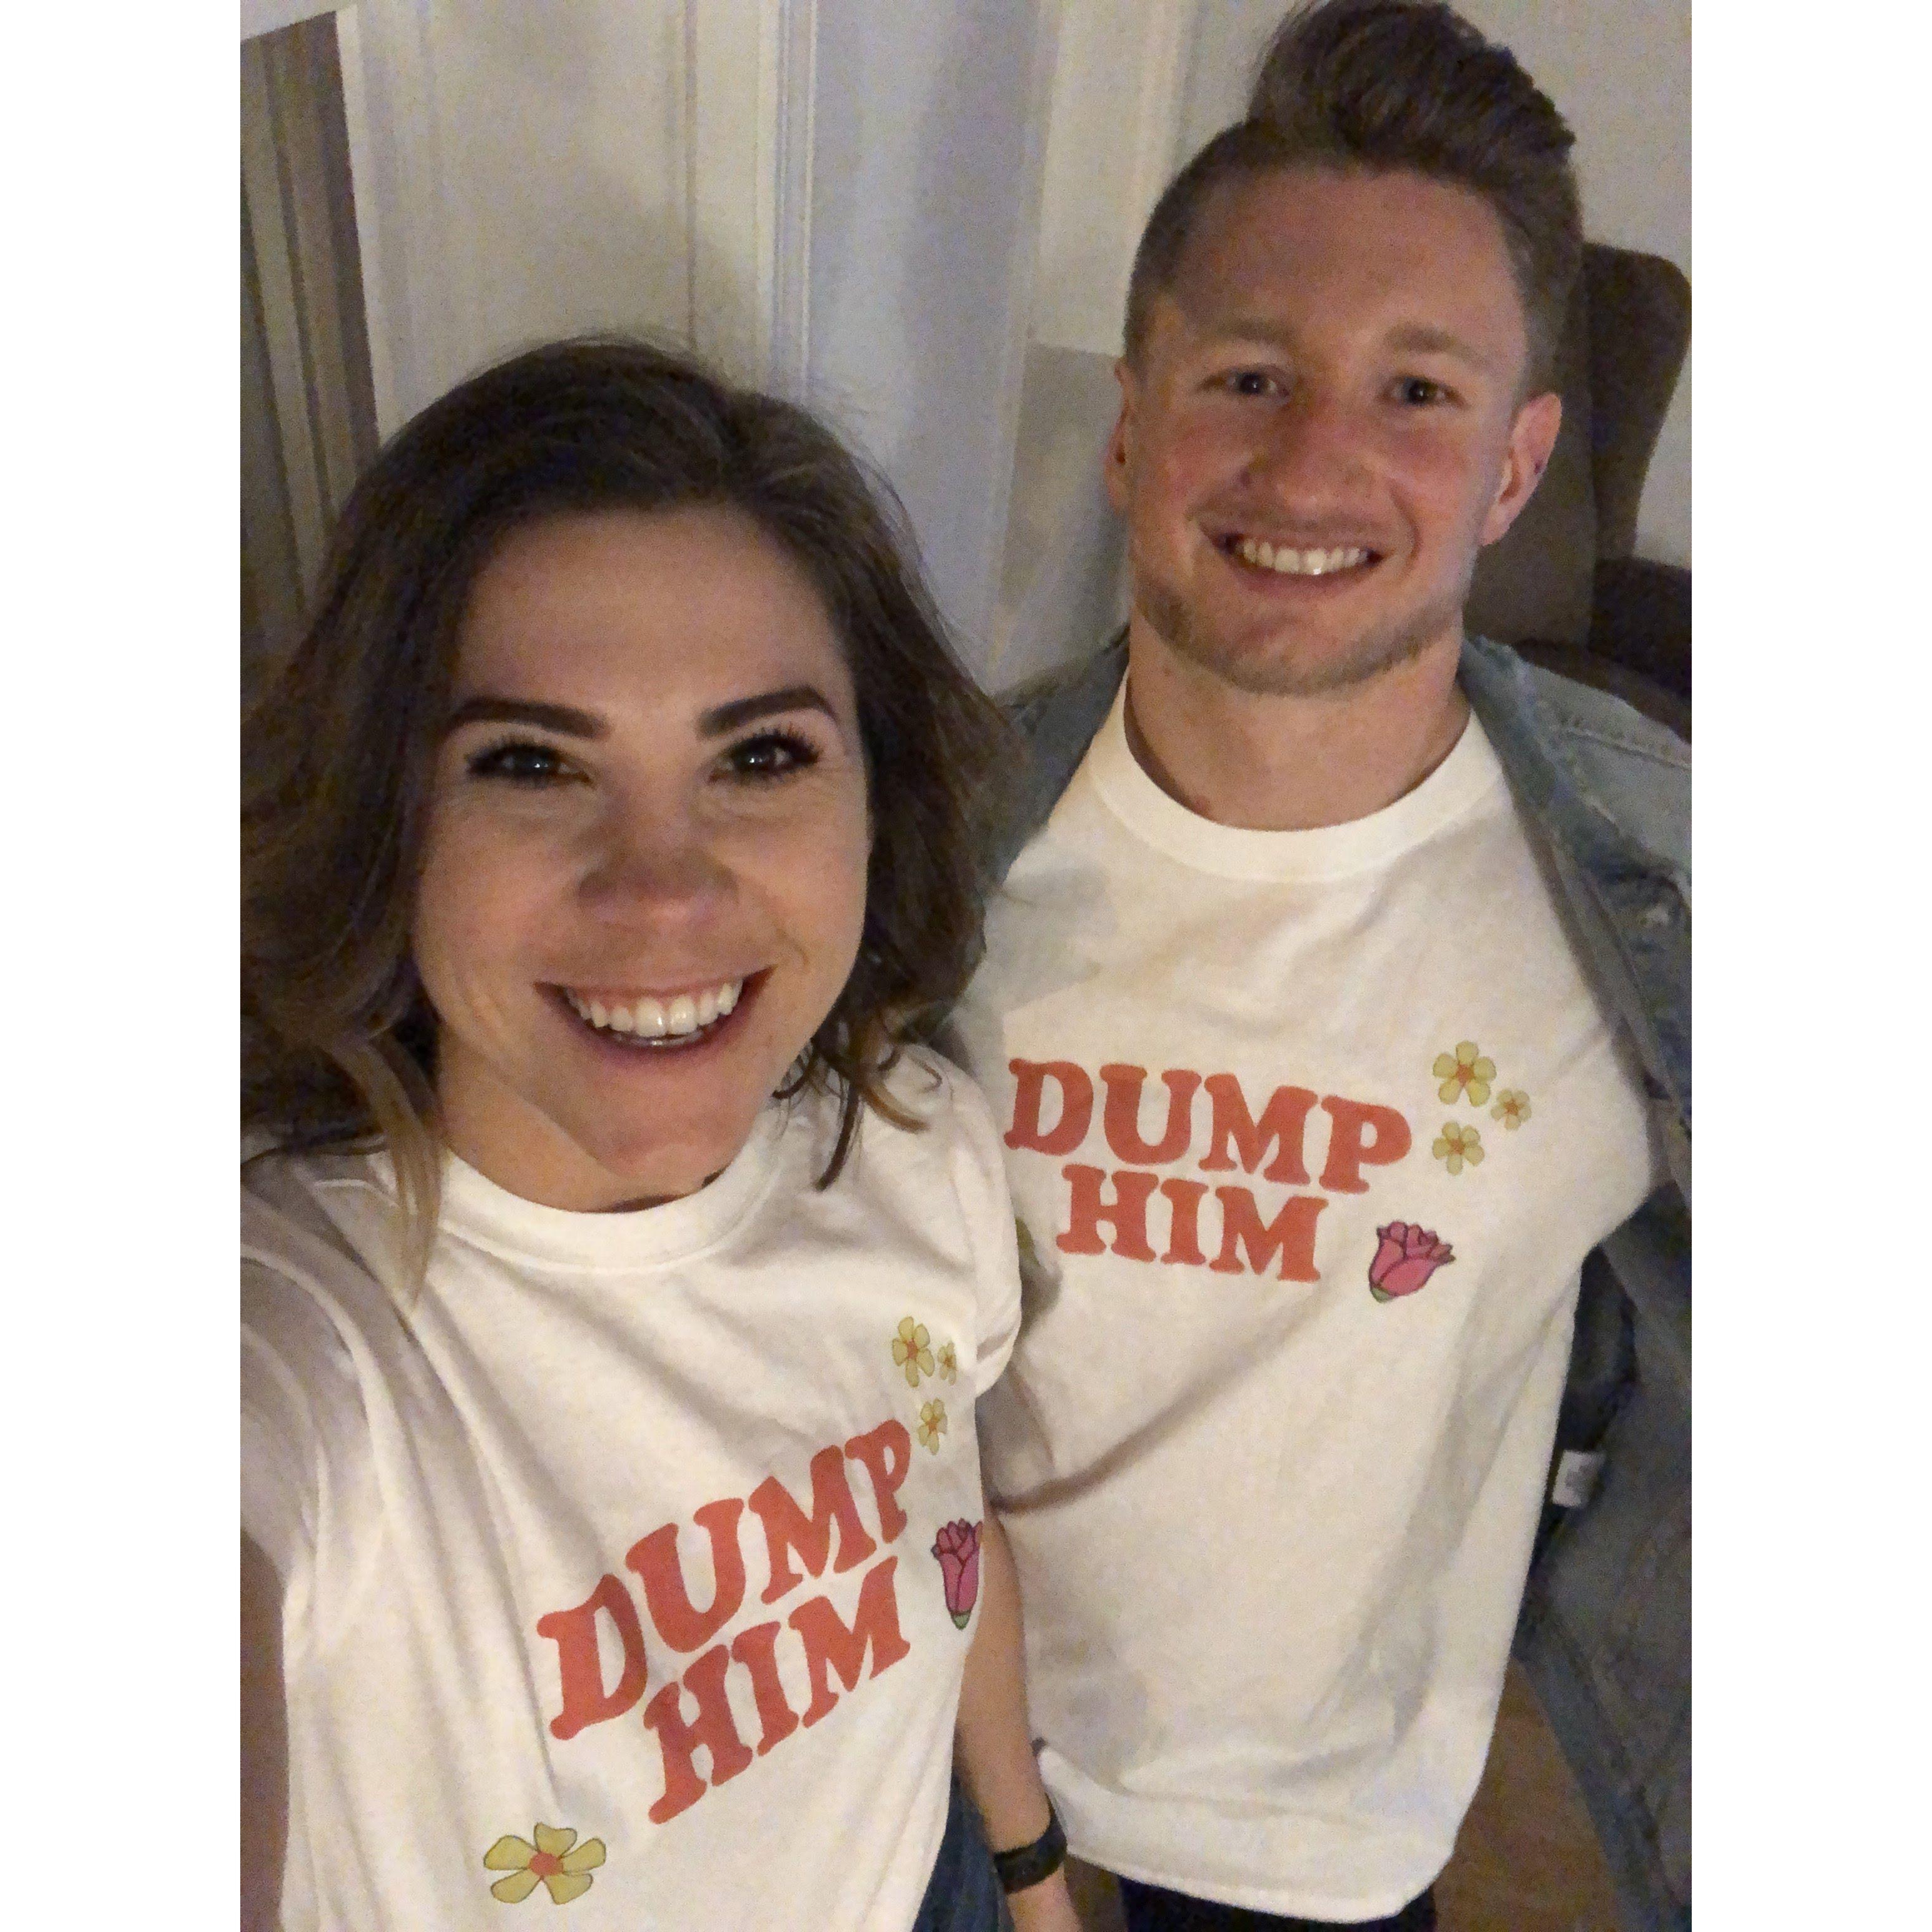 Ironic shirts for our first photo together